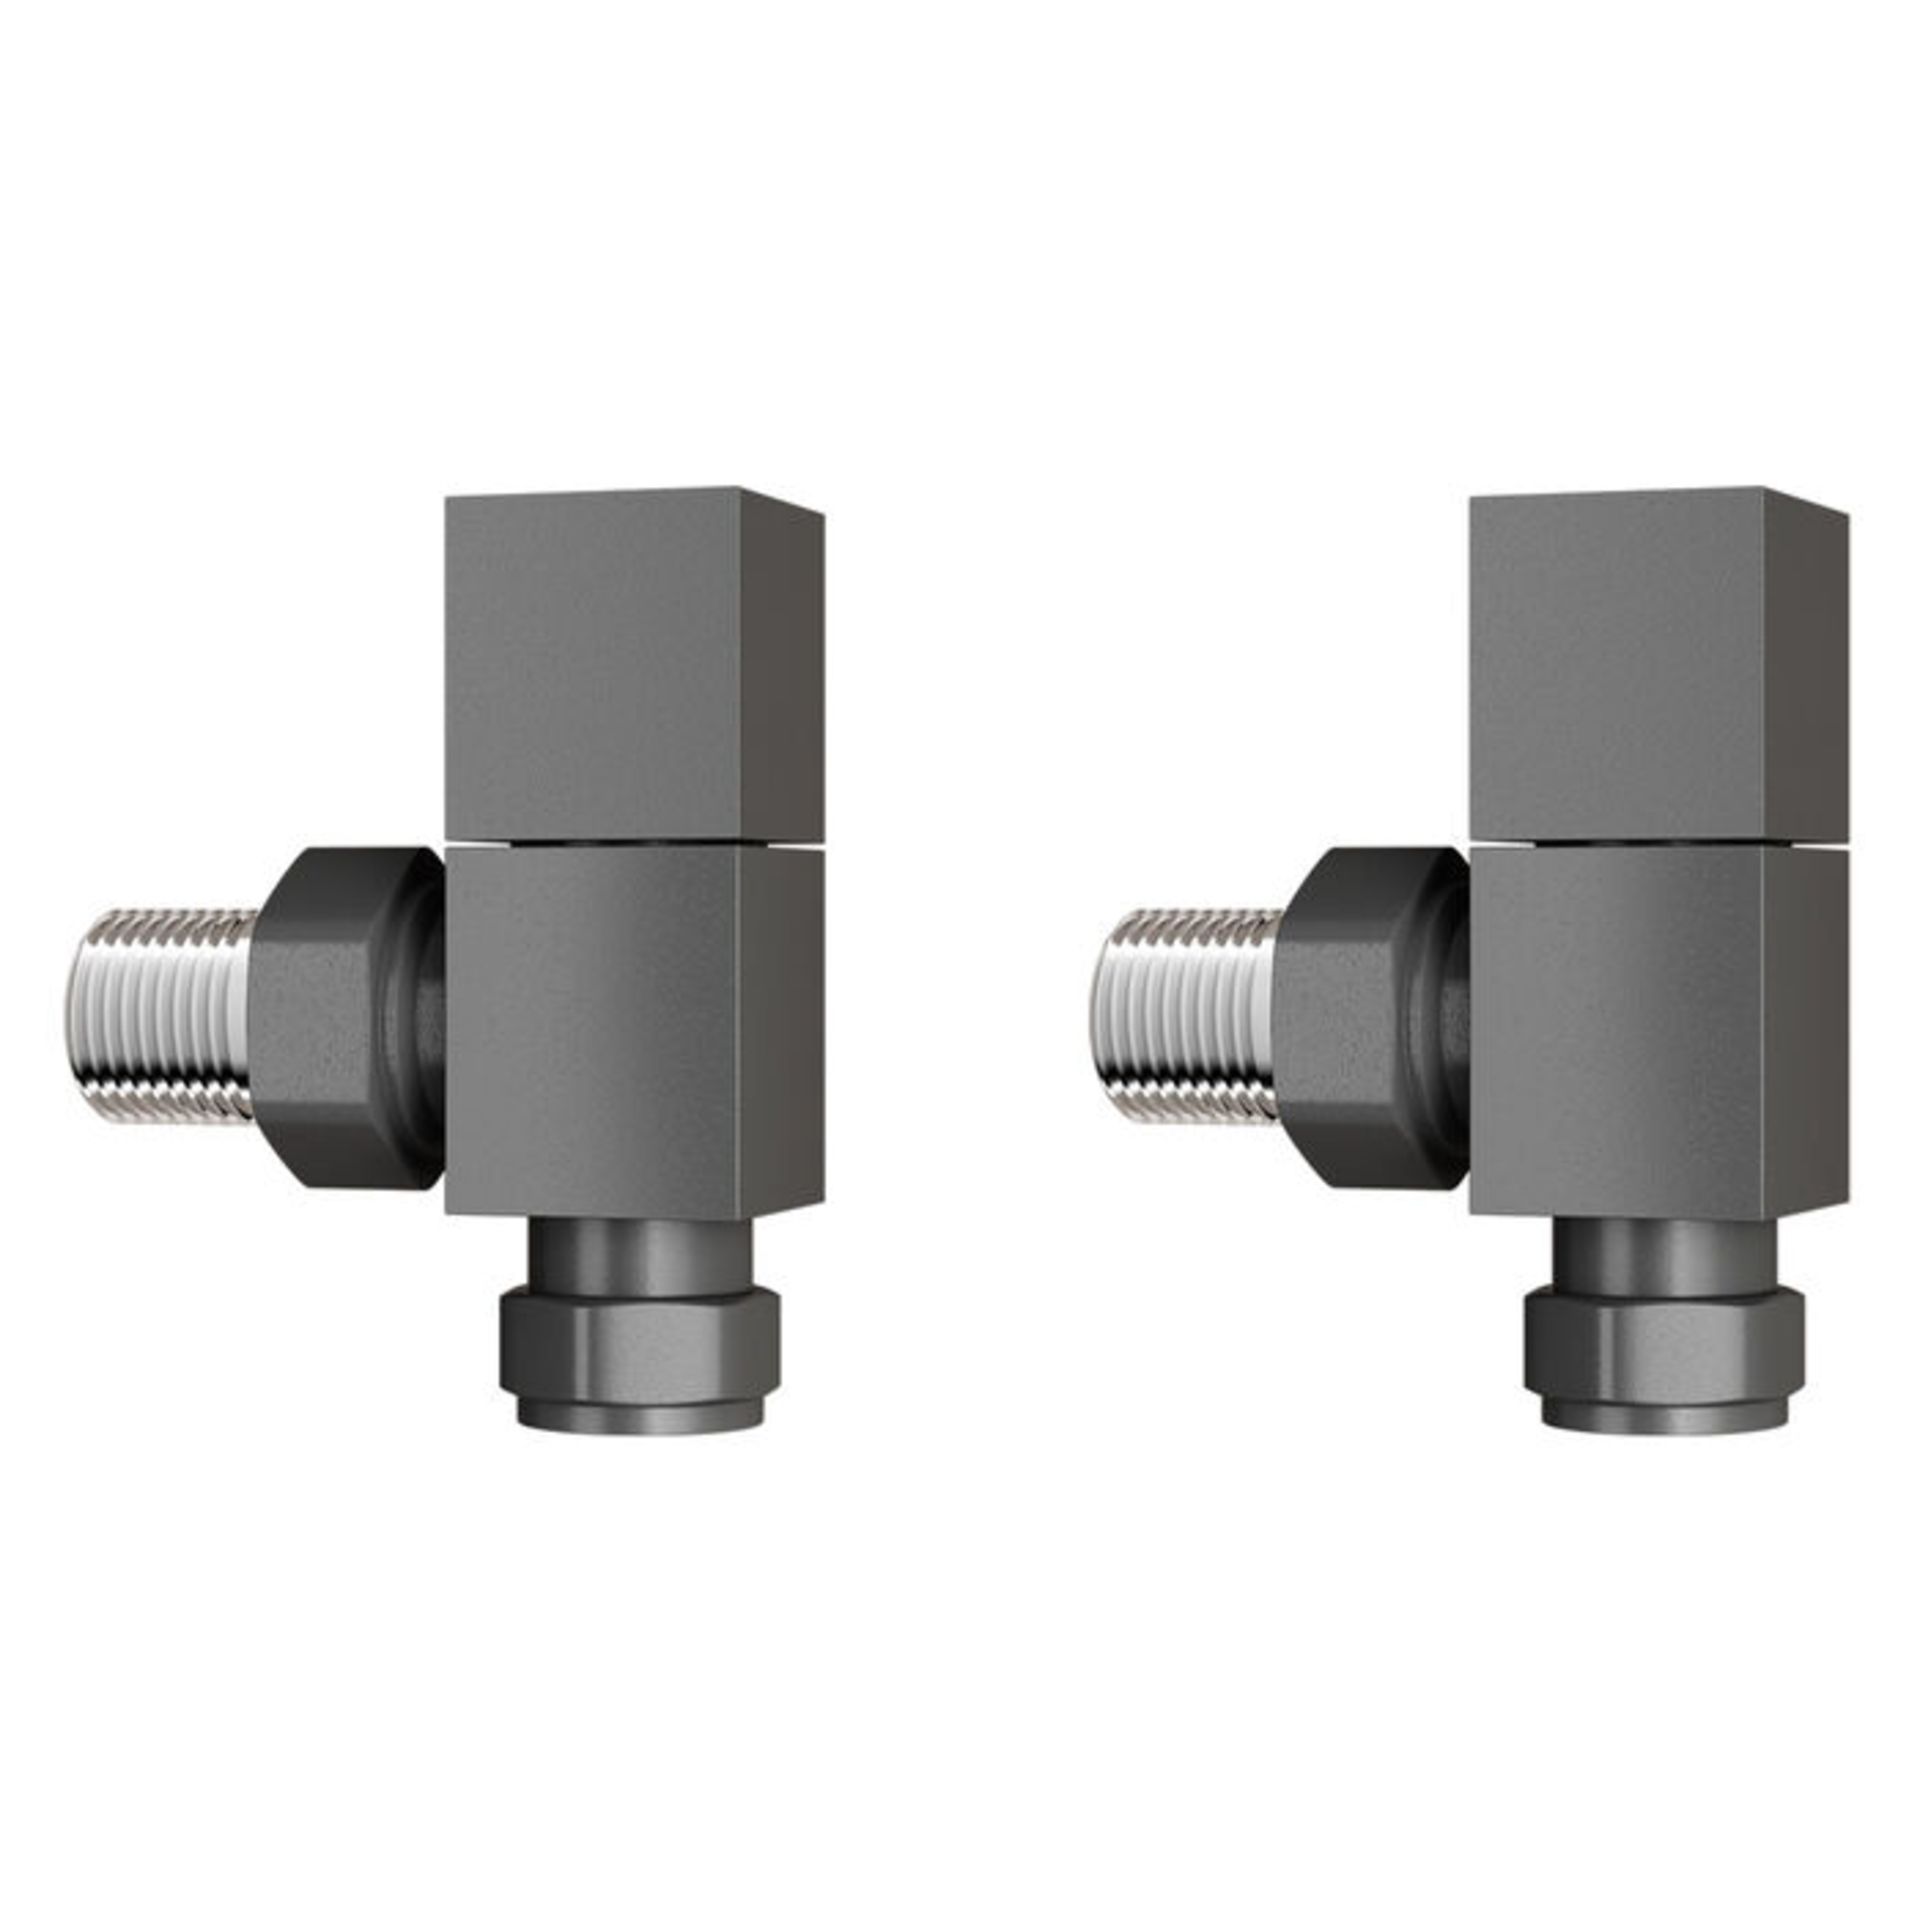 (NV1010) 15mm Standard Connection Square Angled anthracite Radiator Valves Made of solid brass... - Image 2 of 3